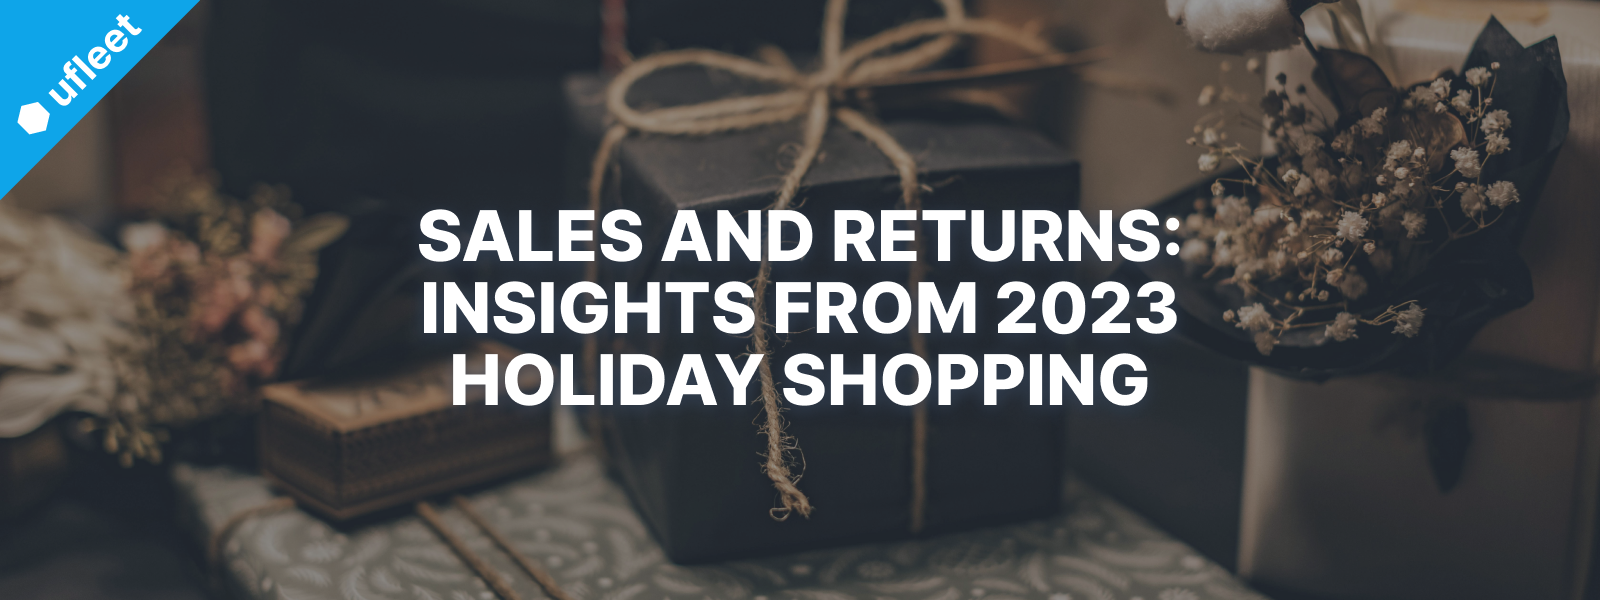 sales and returns from 2023 holiday shopping